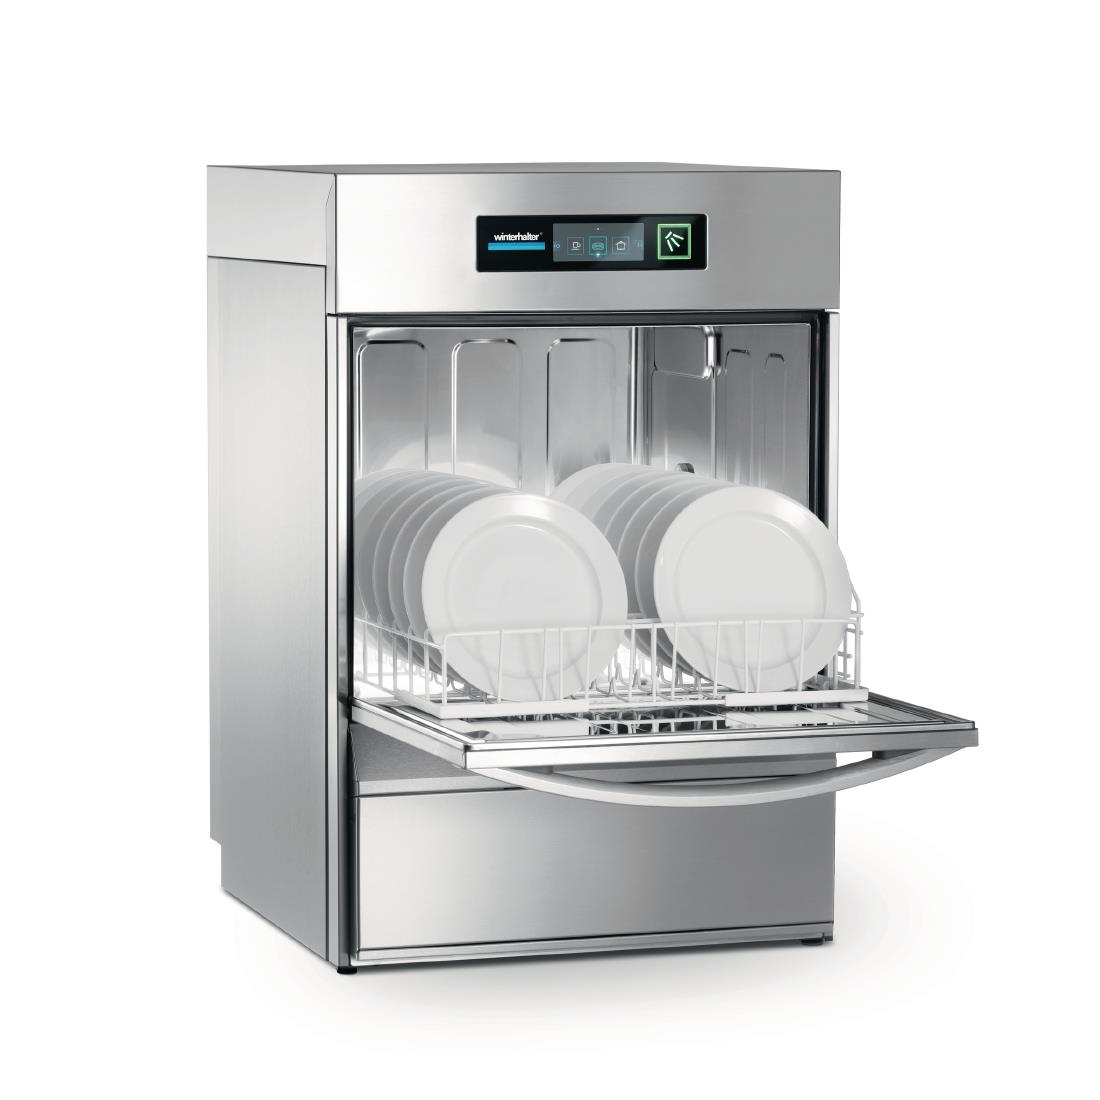 Winterhalter Undercounter Dishwasher UC-L Energy with Install